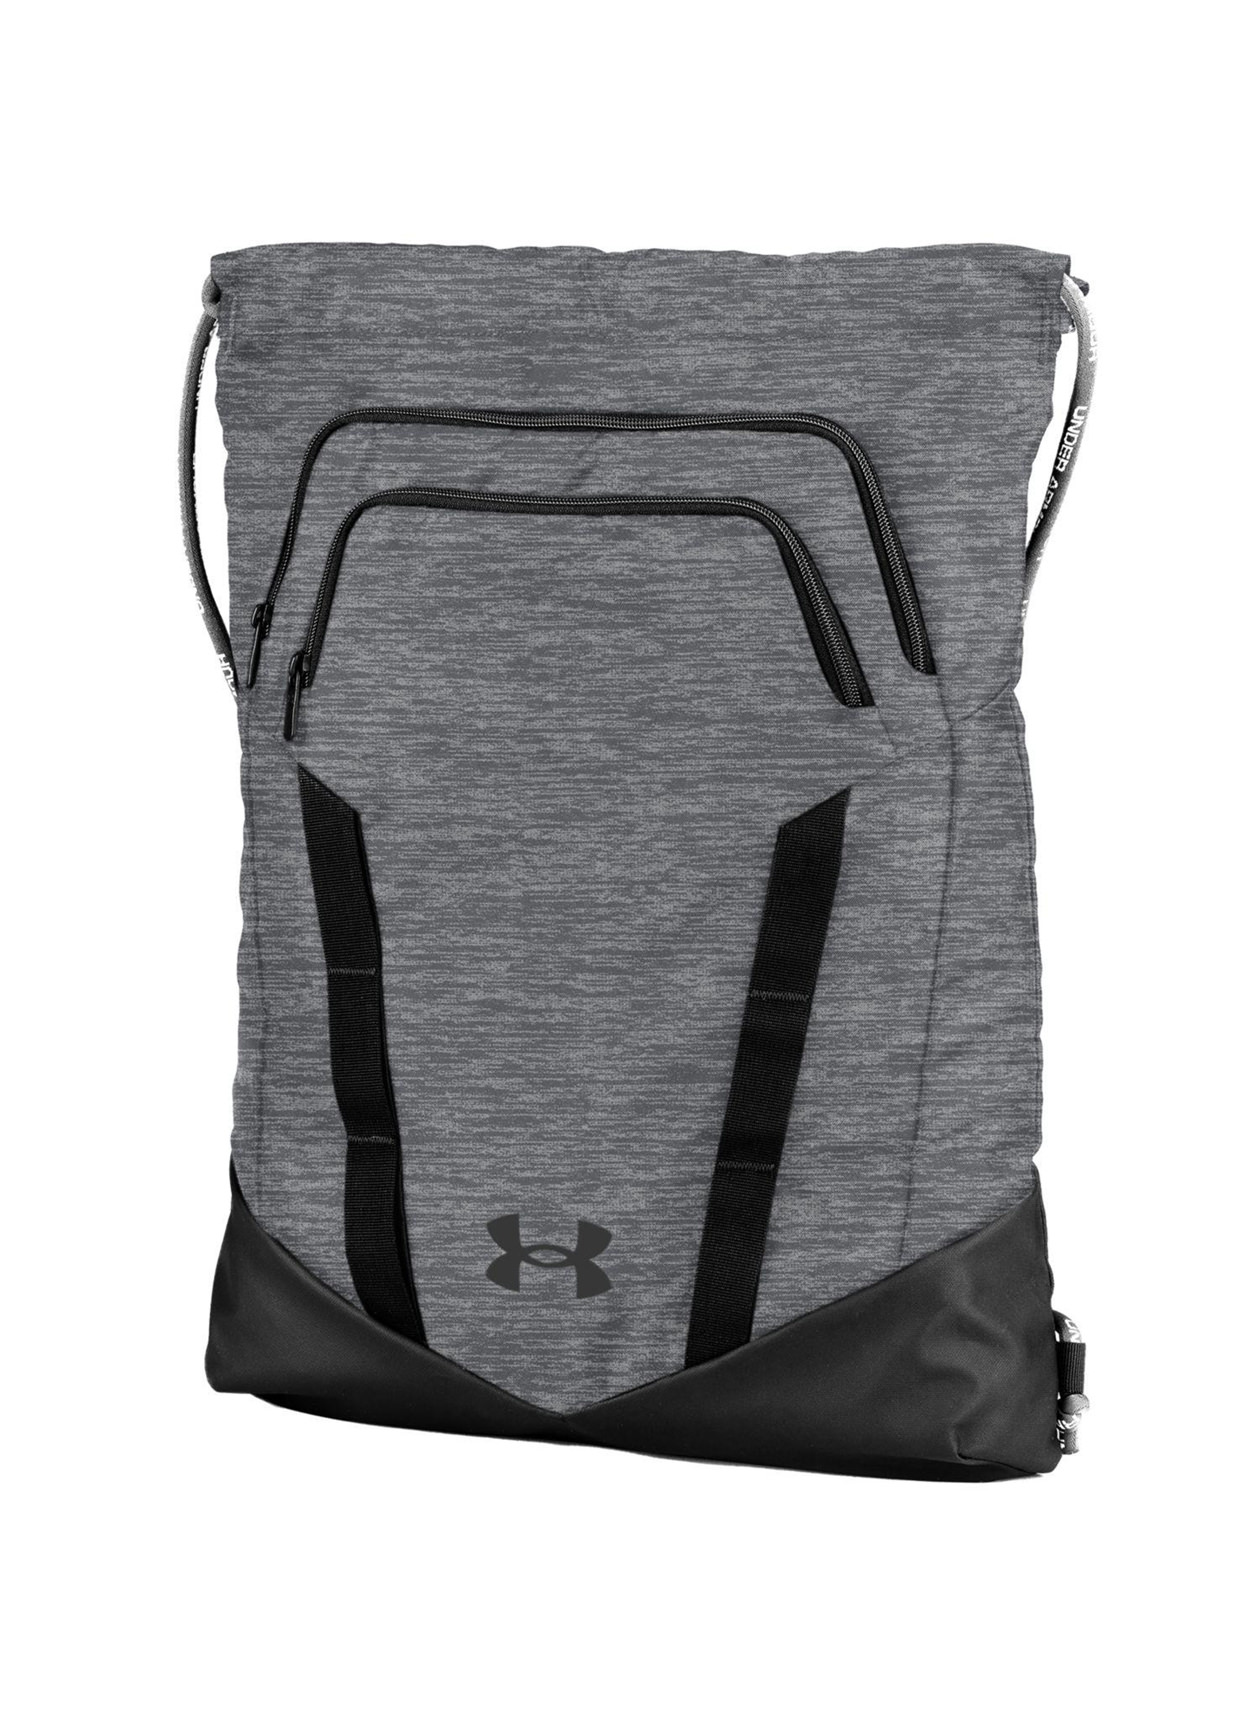 Under Armour Pitch Grey Novelty Undeniable Sackpack 2.0